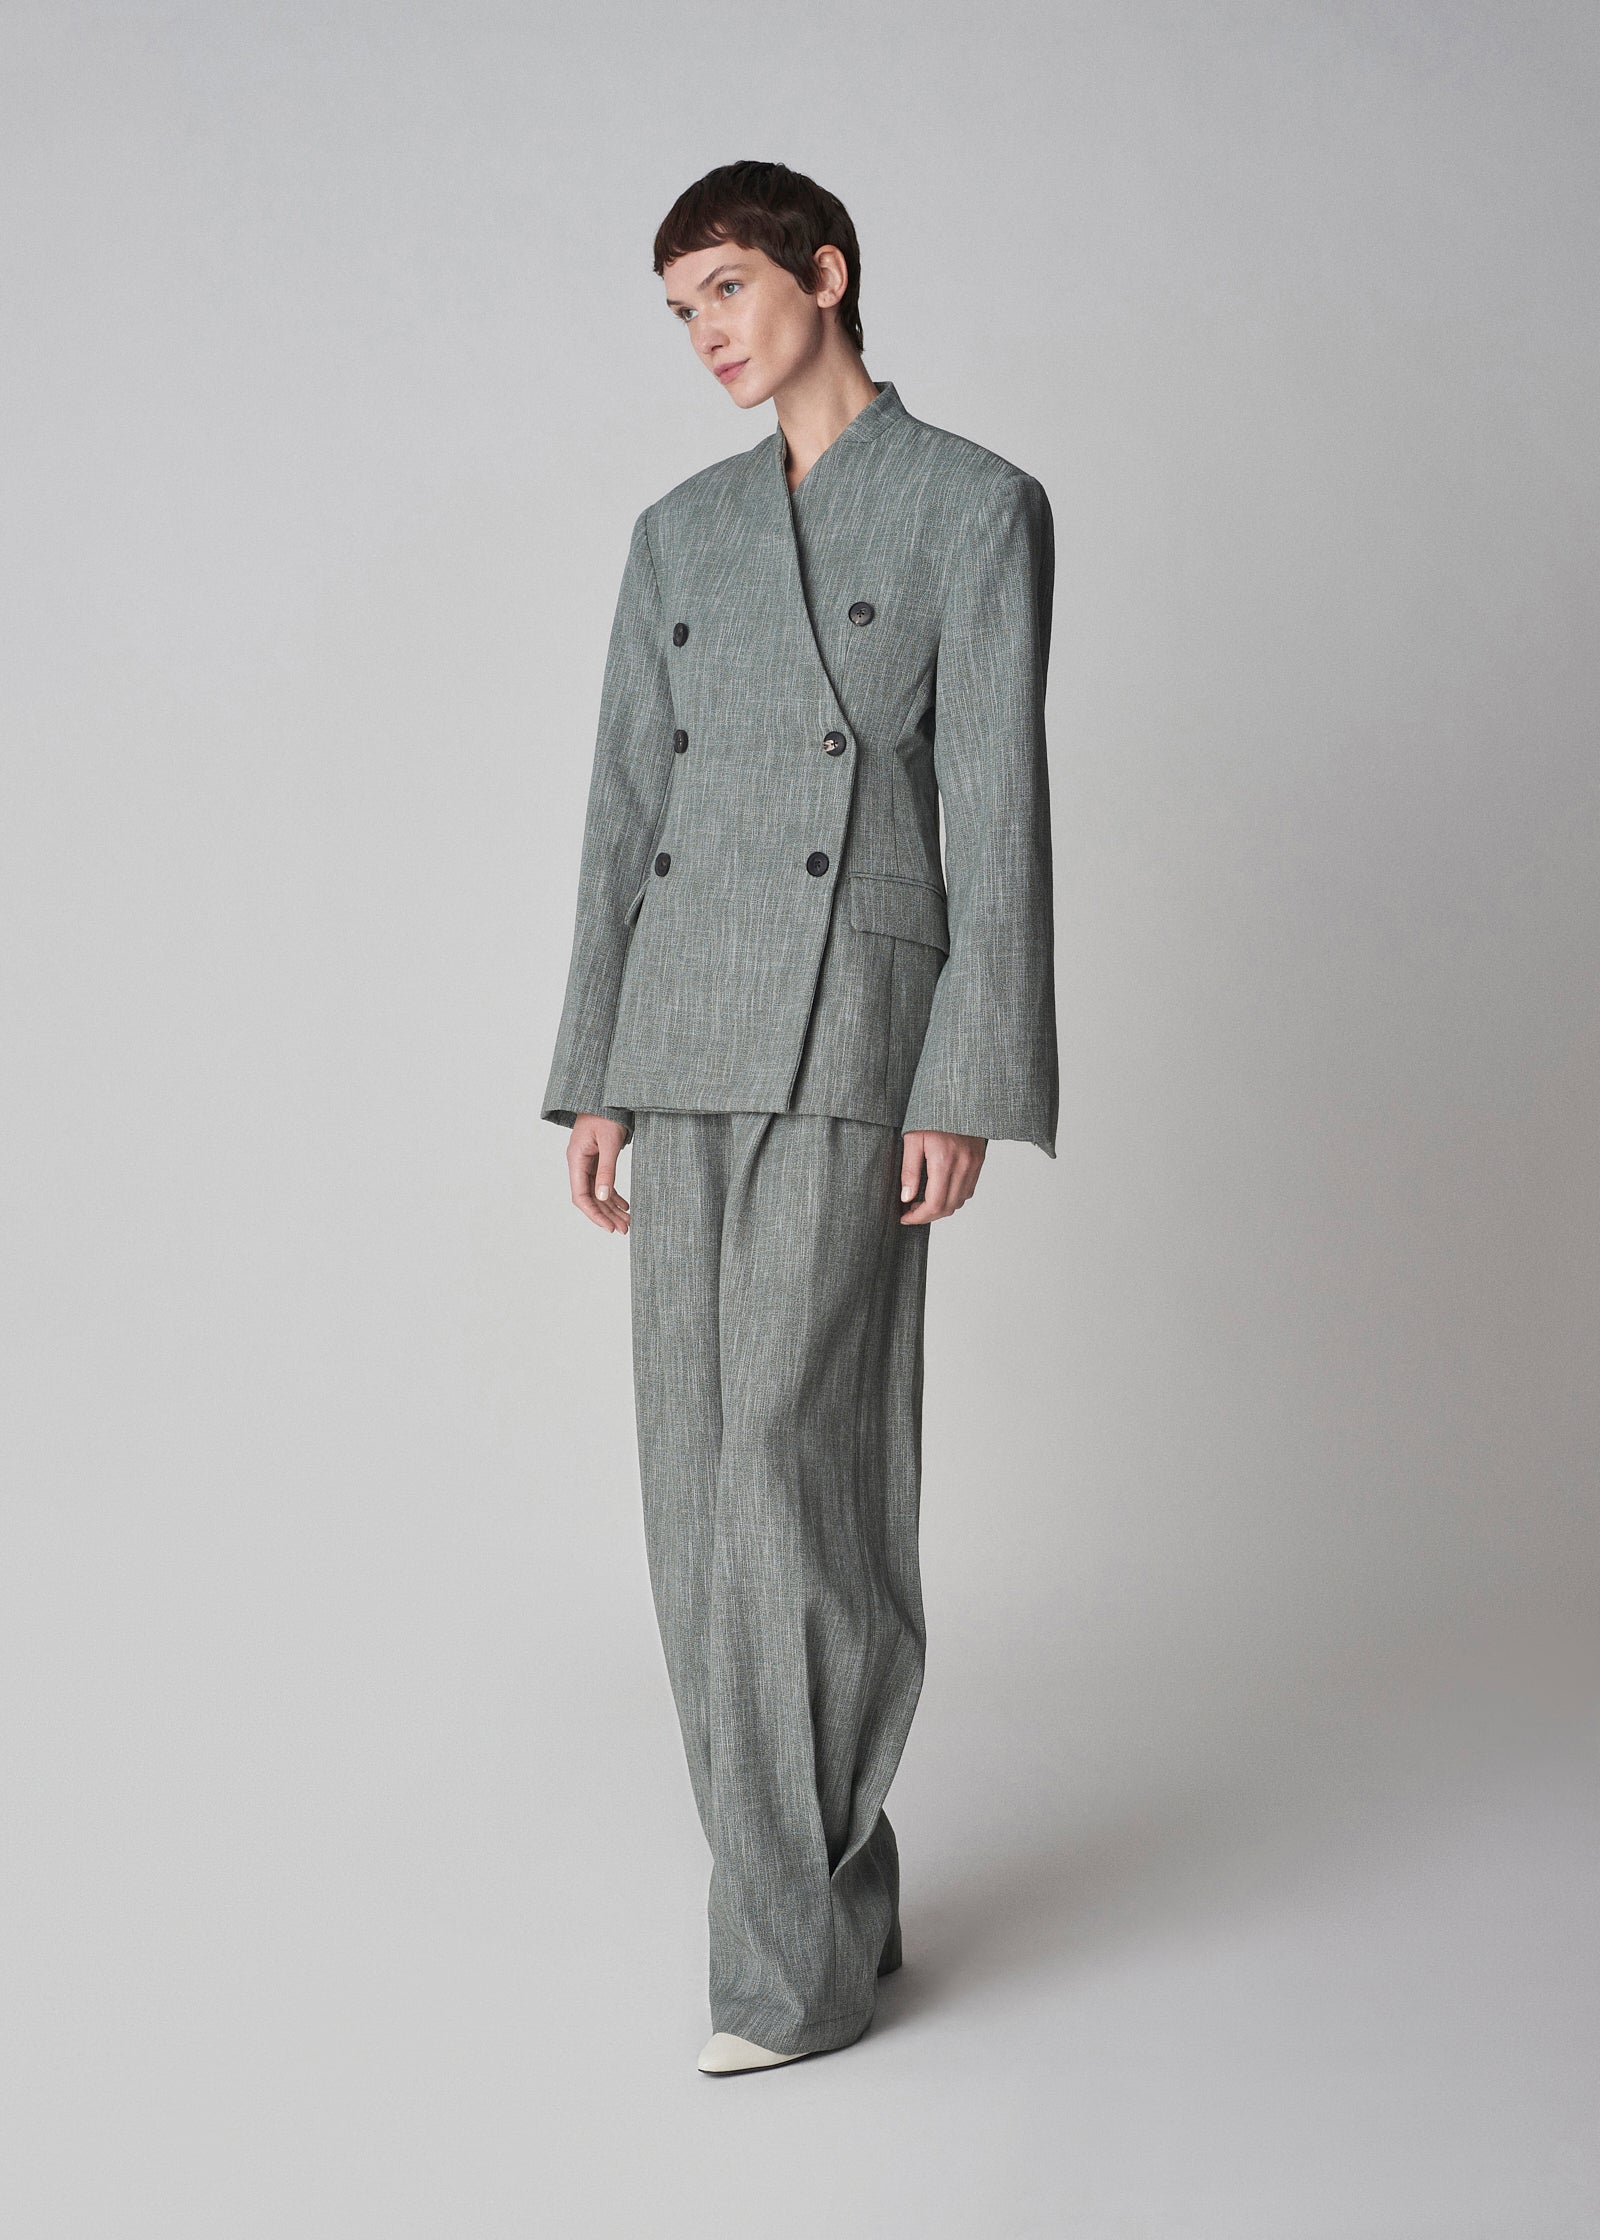 Sculptural Jacket in Melange Suiting - Dark Forest - CO Collections